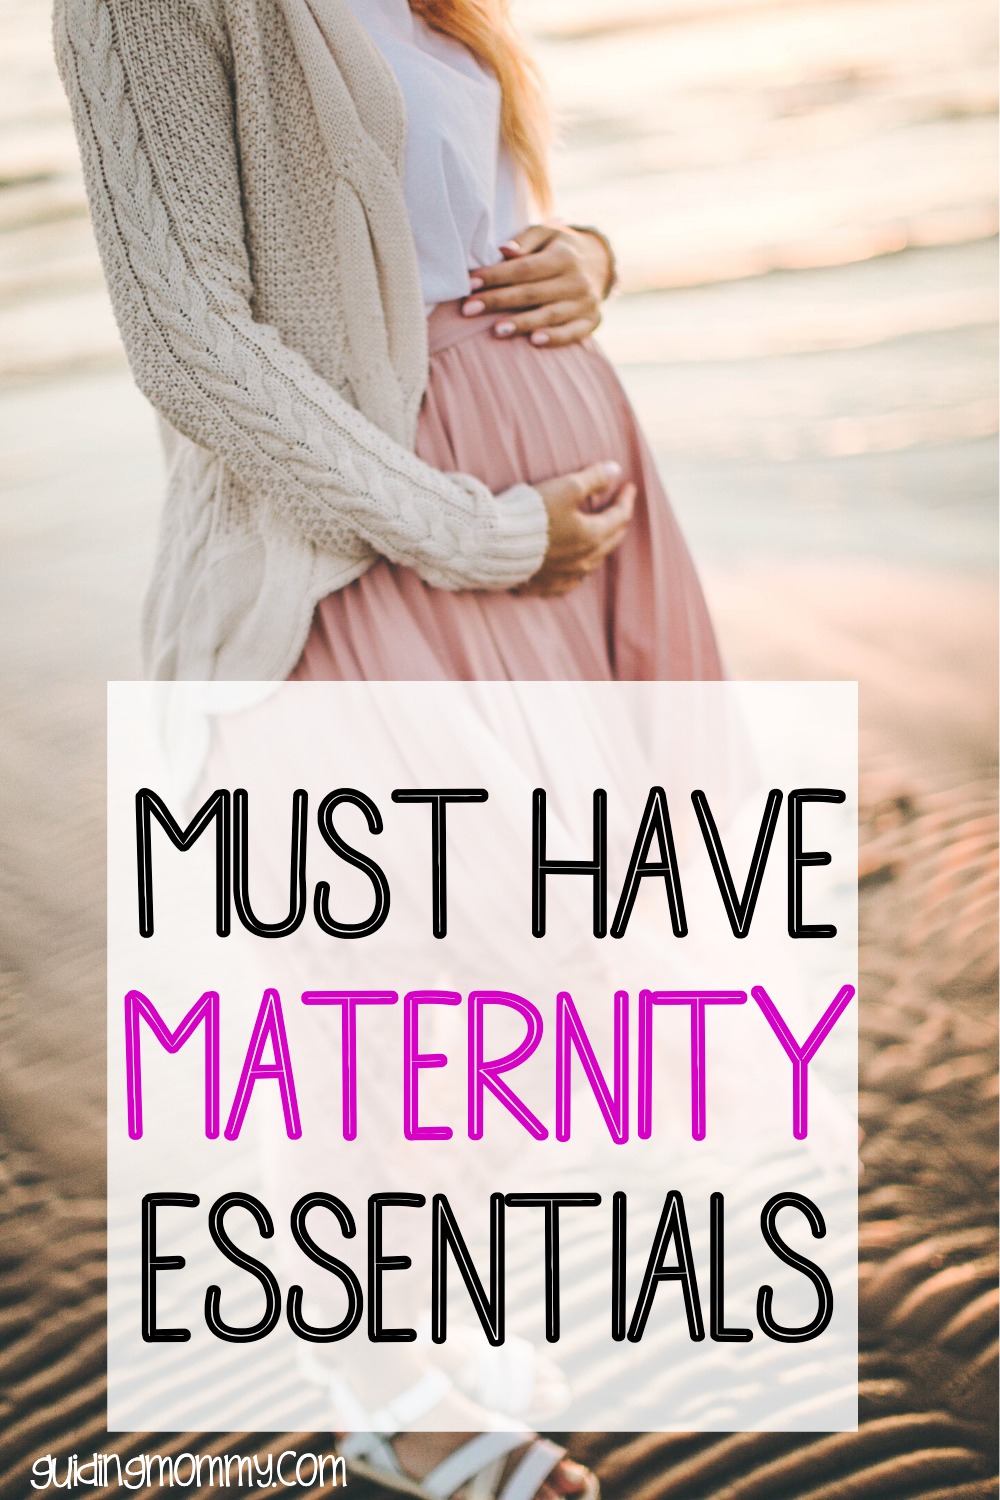 Must have maternity essentials